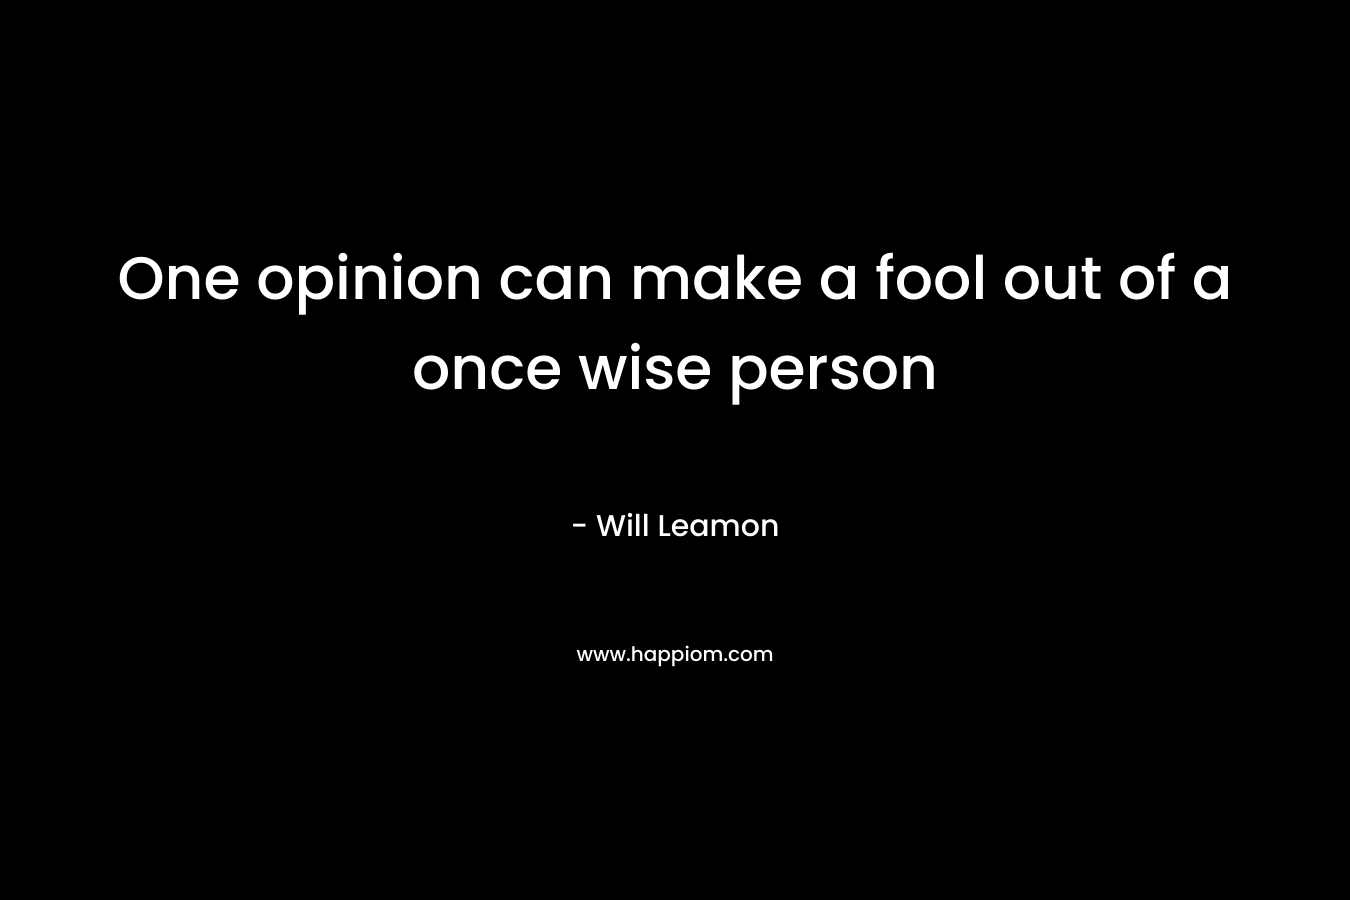 One opinion can make a fool out of a once wise person